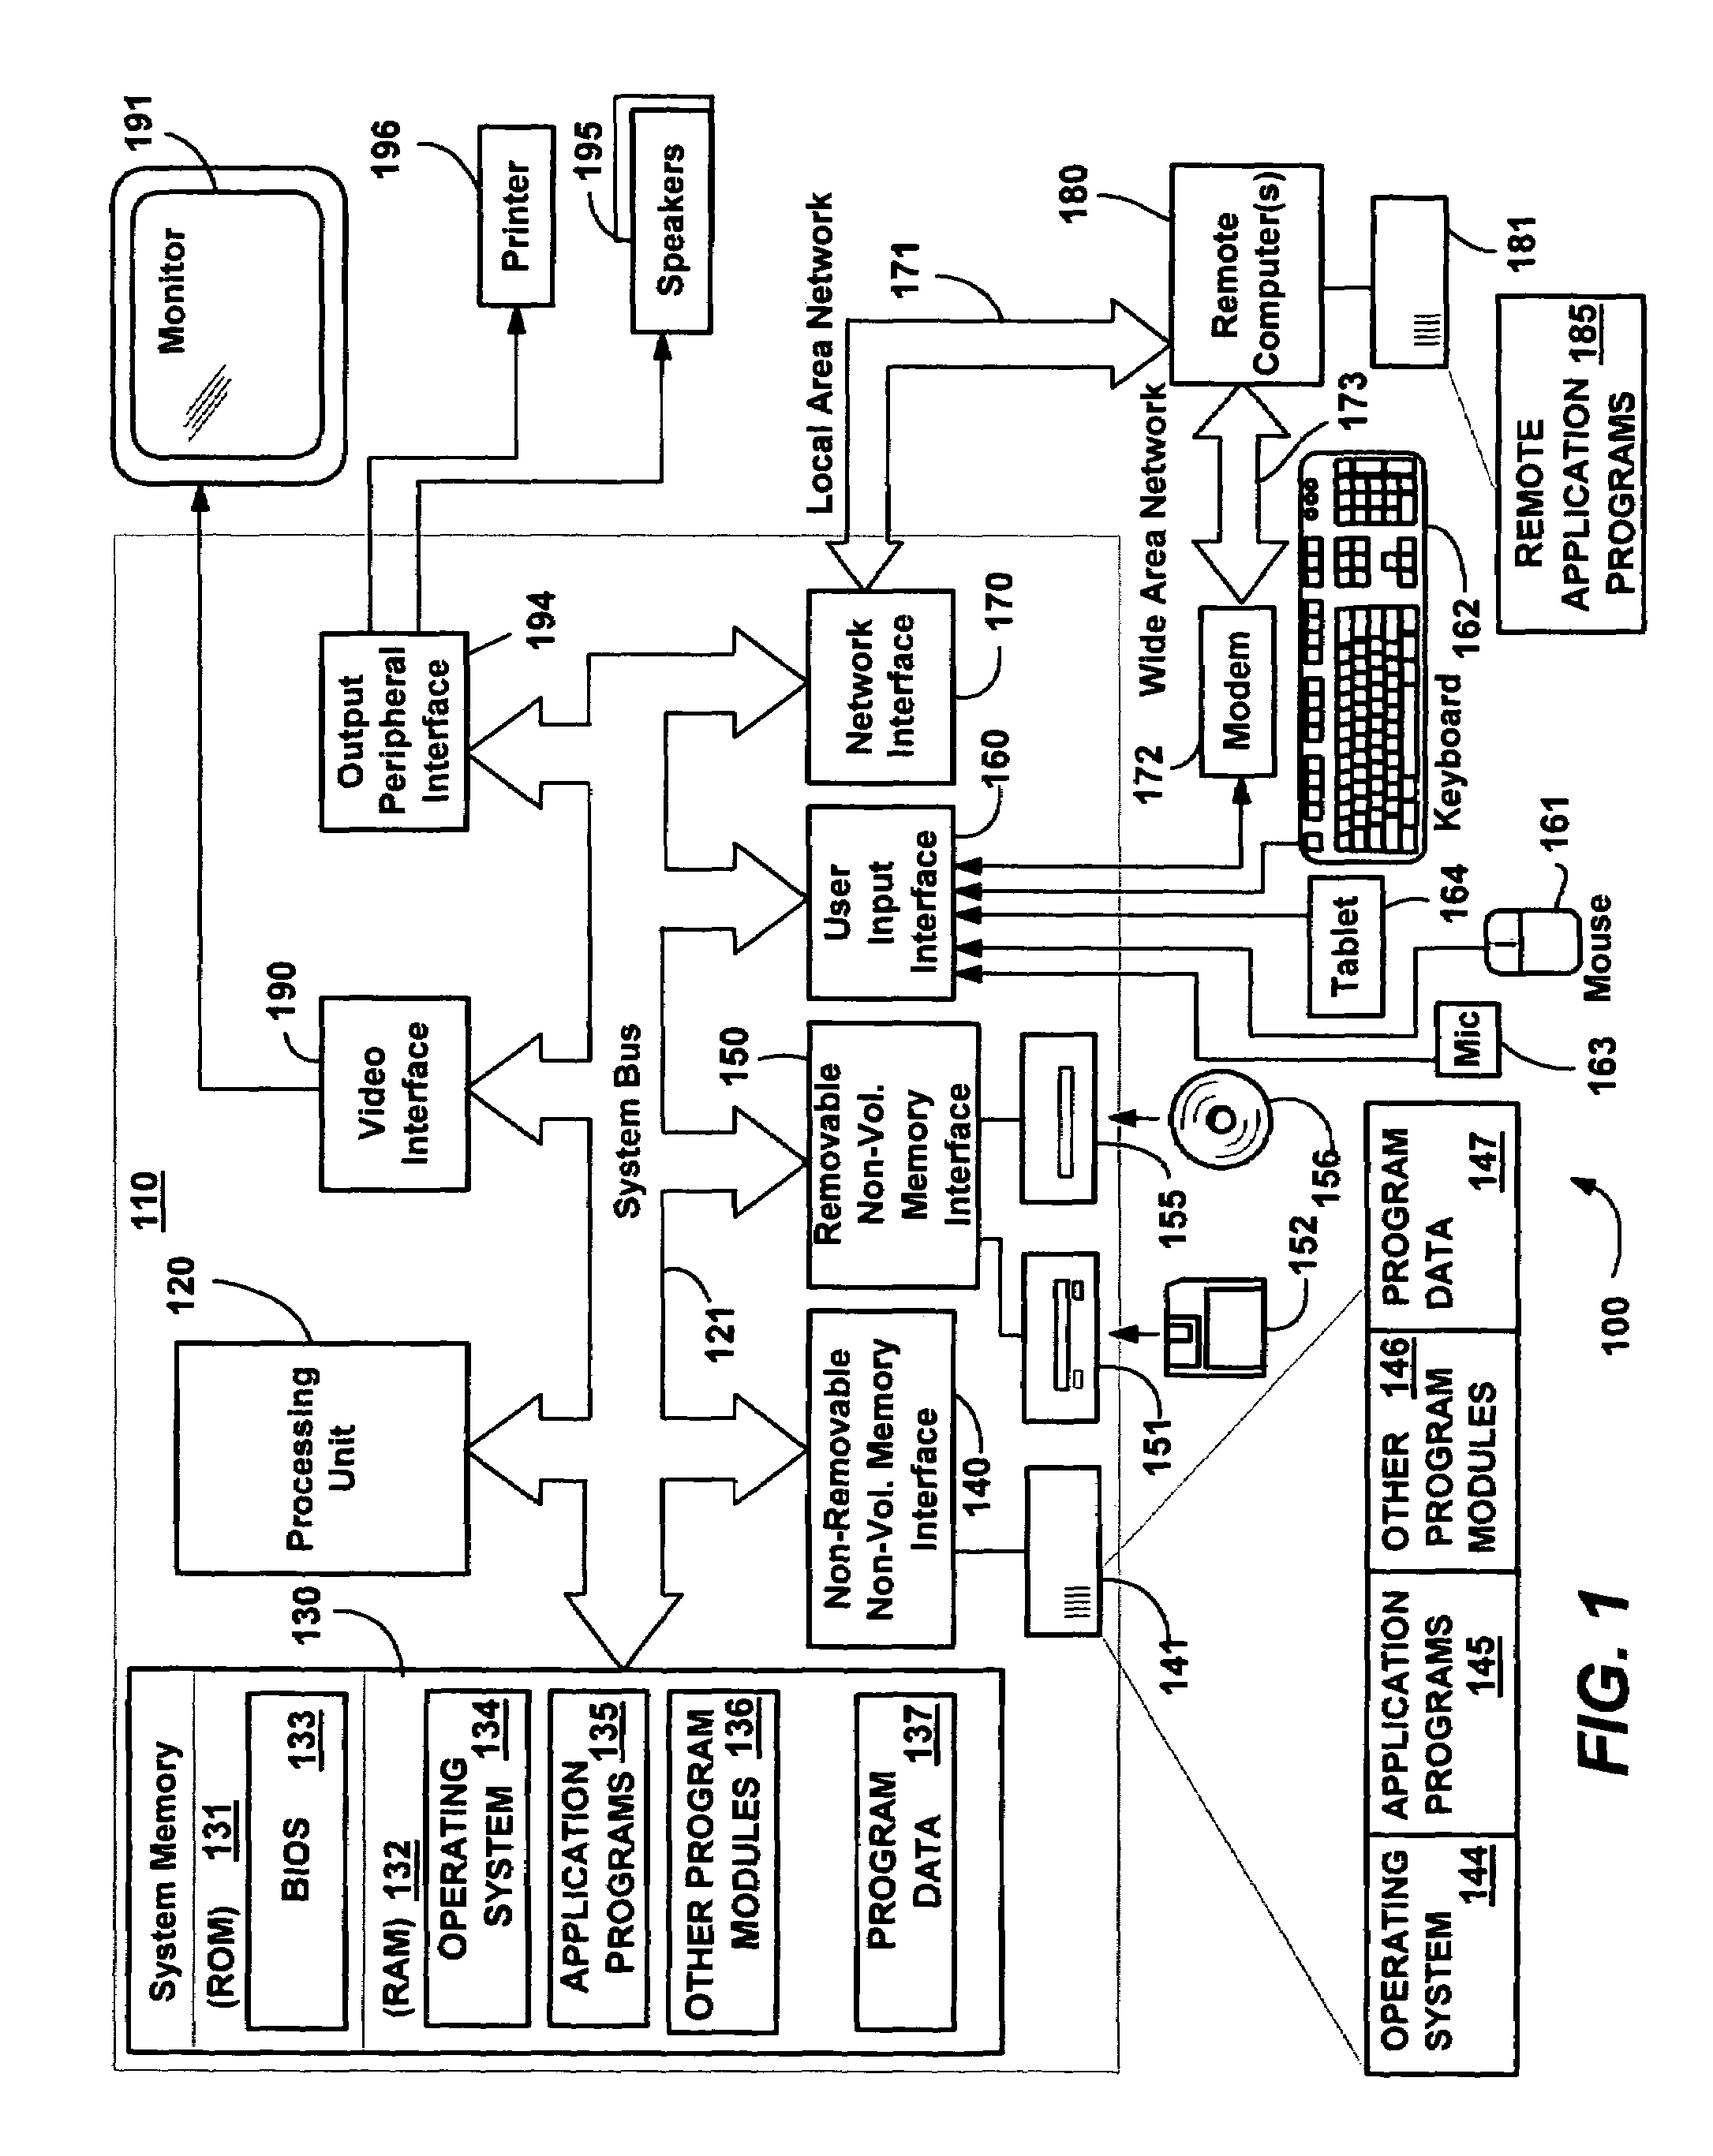 System and method for network topology discovery